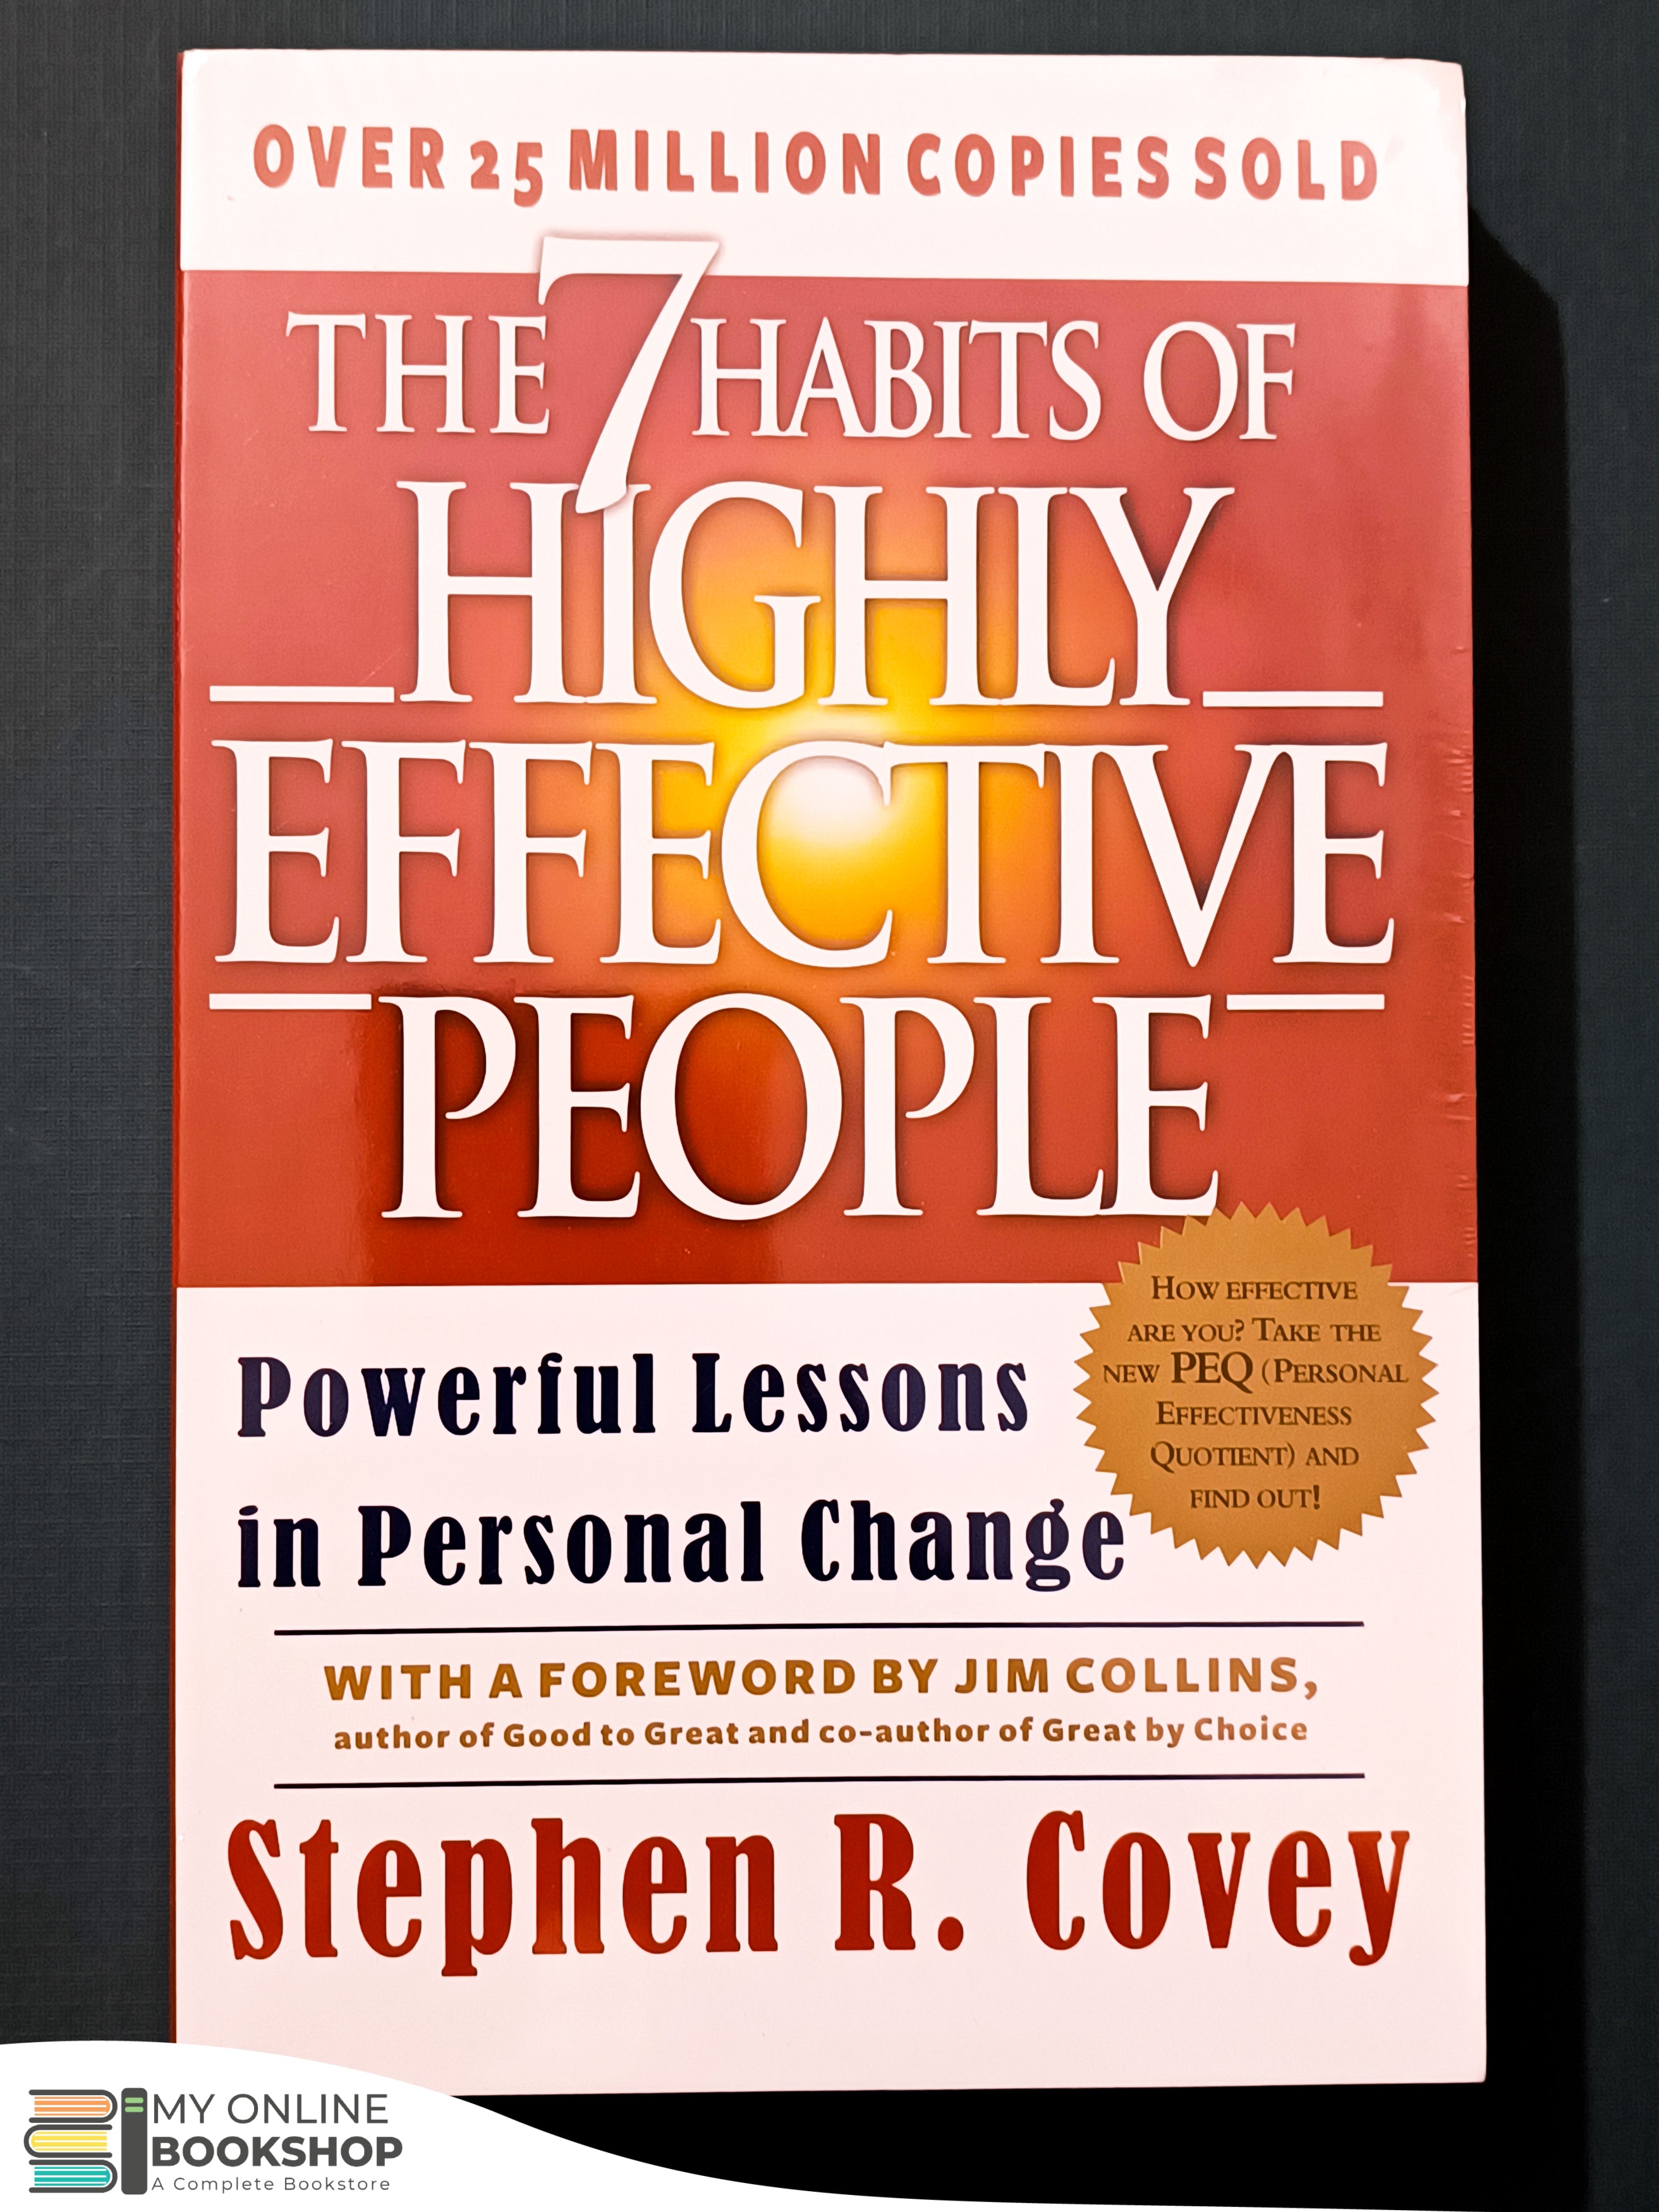 The　By　R.　Covey　Habits　–　of　Effective　Highly　People　Stephen　MOB10656